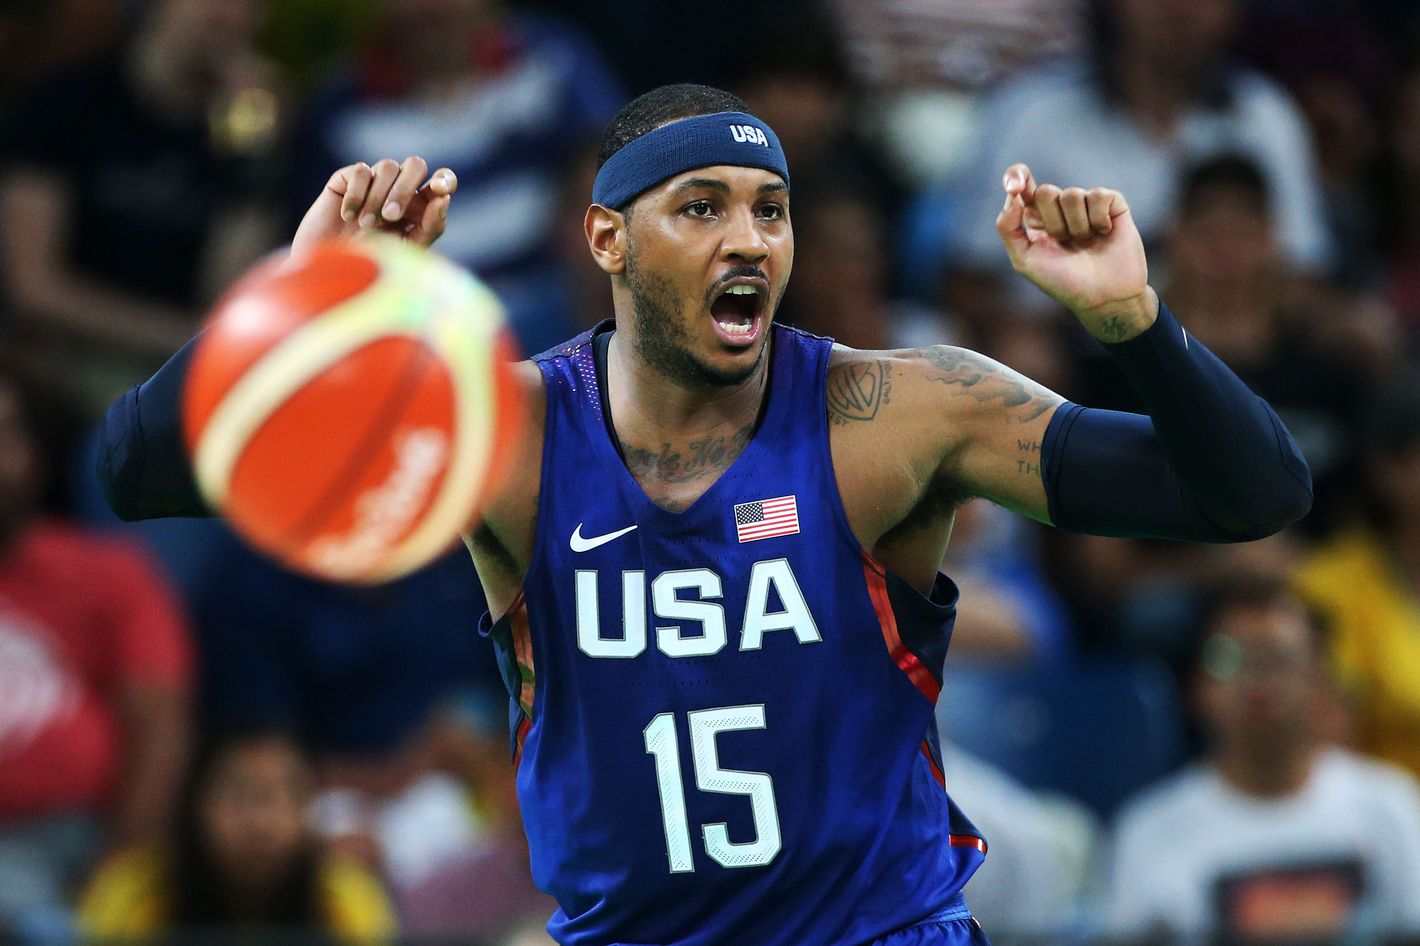 USA Today's All USA basketball player Carmelo Anthony of Oak Hill